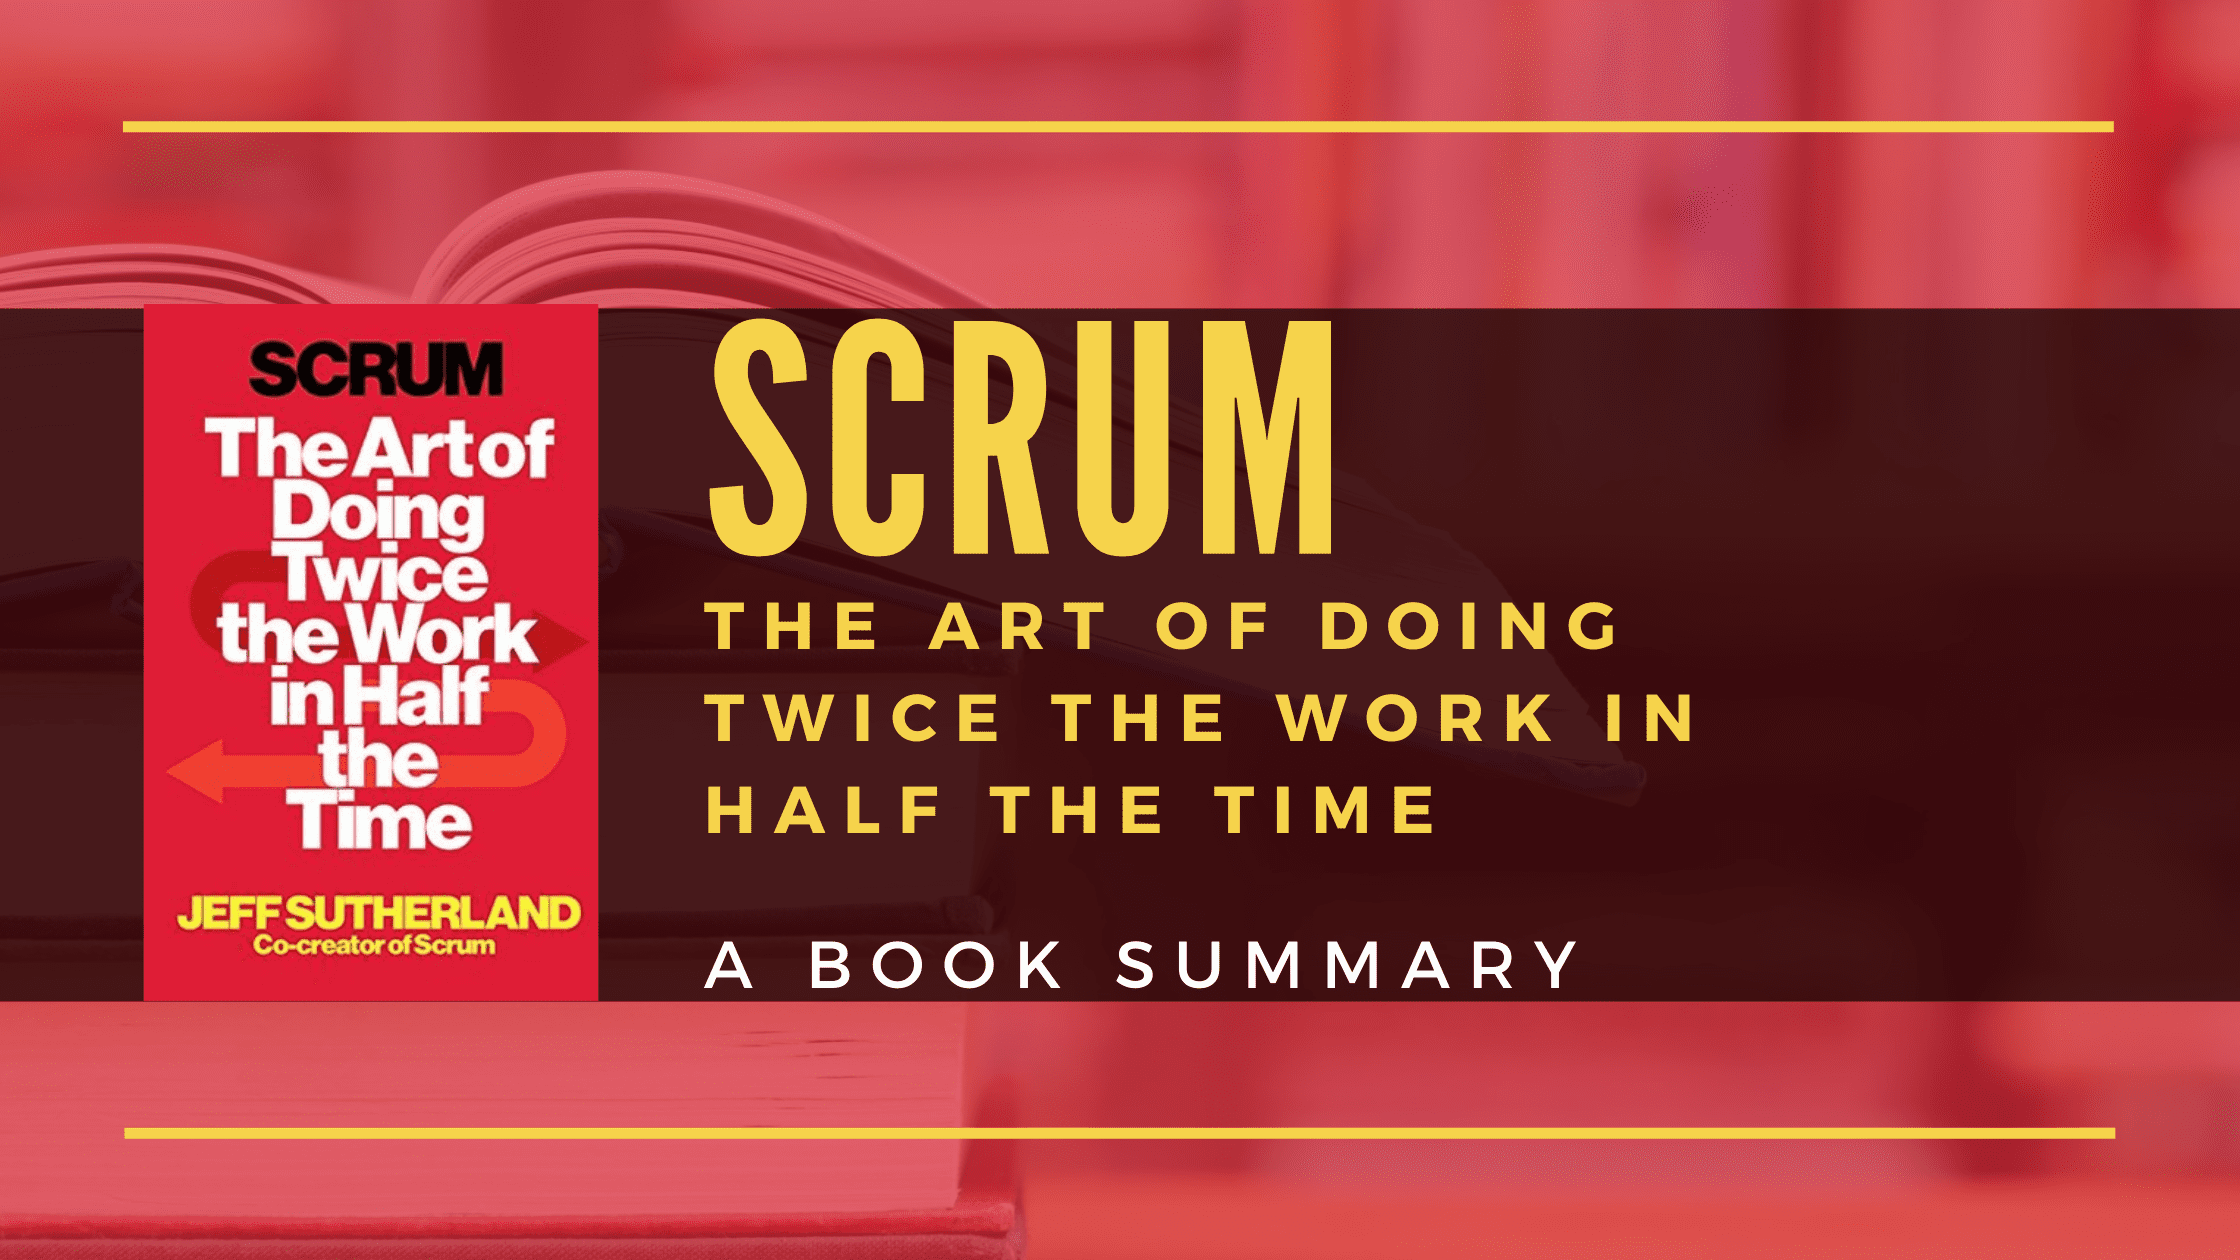 Scrum Helps To Complete Twice The Work In Half The Time